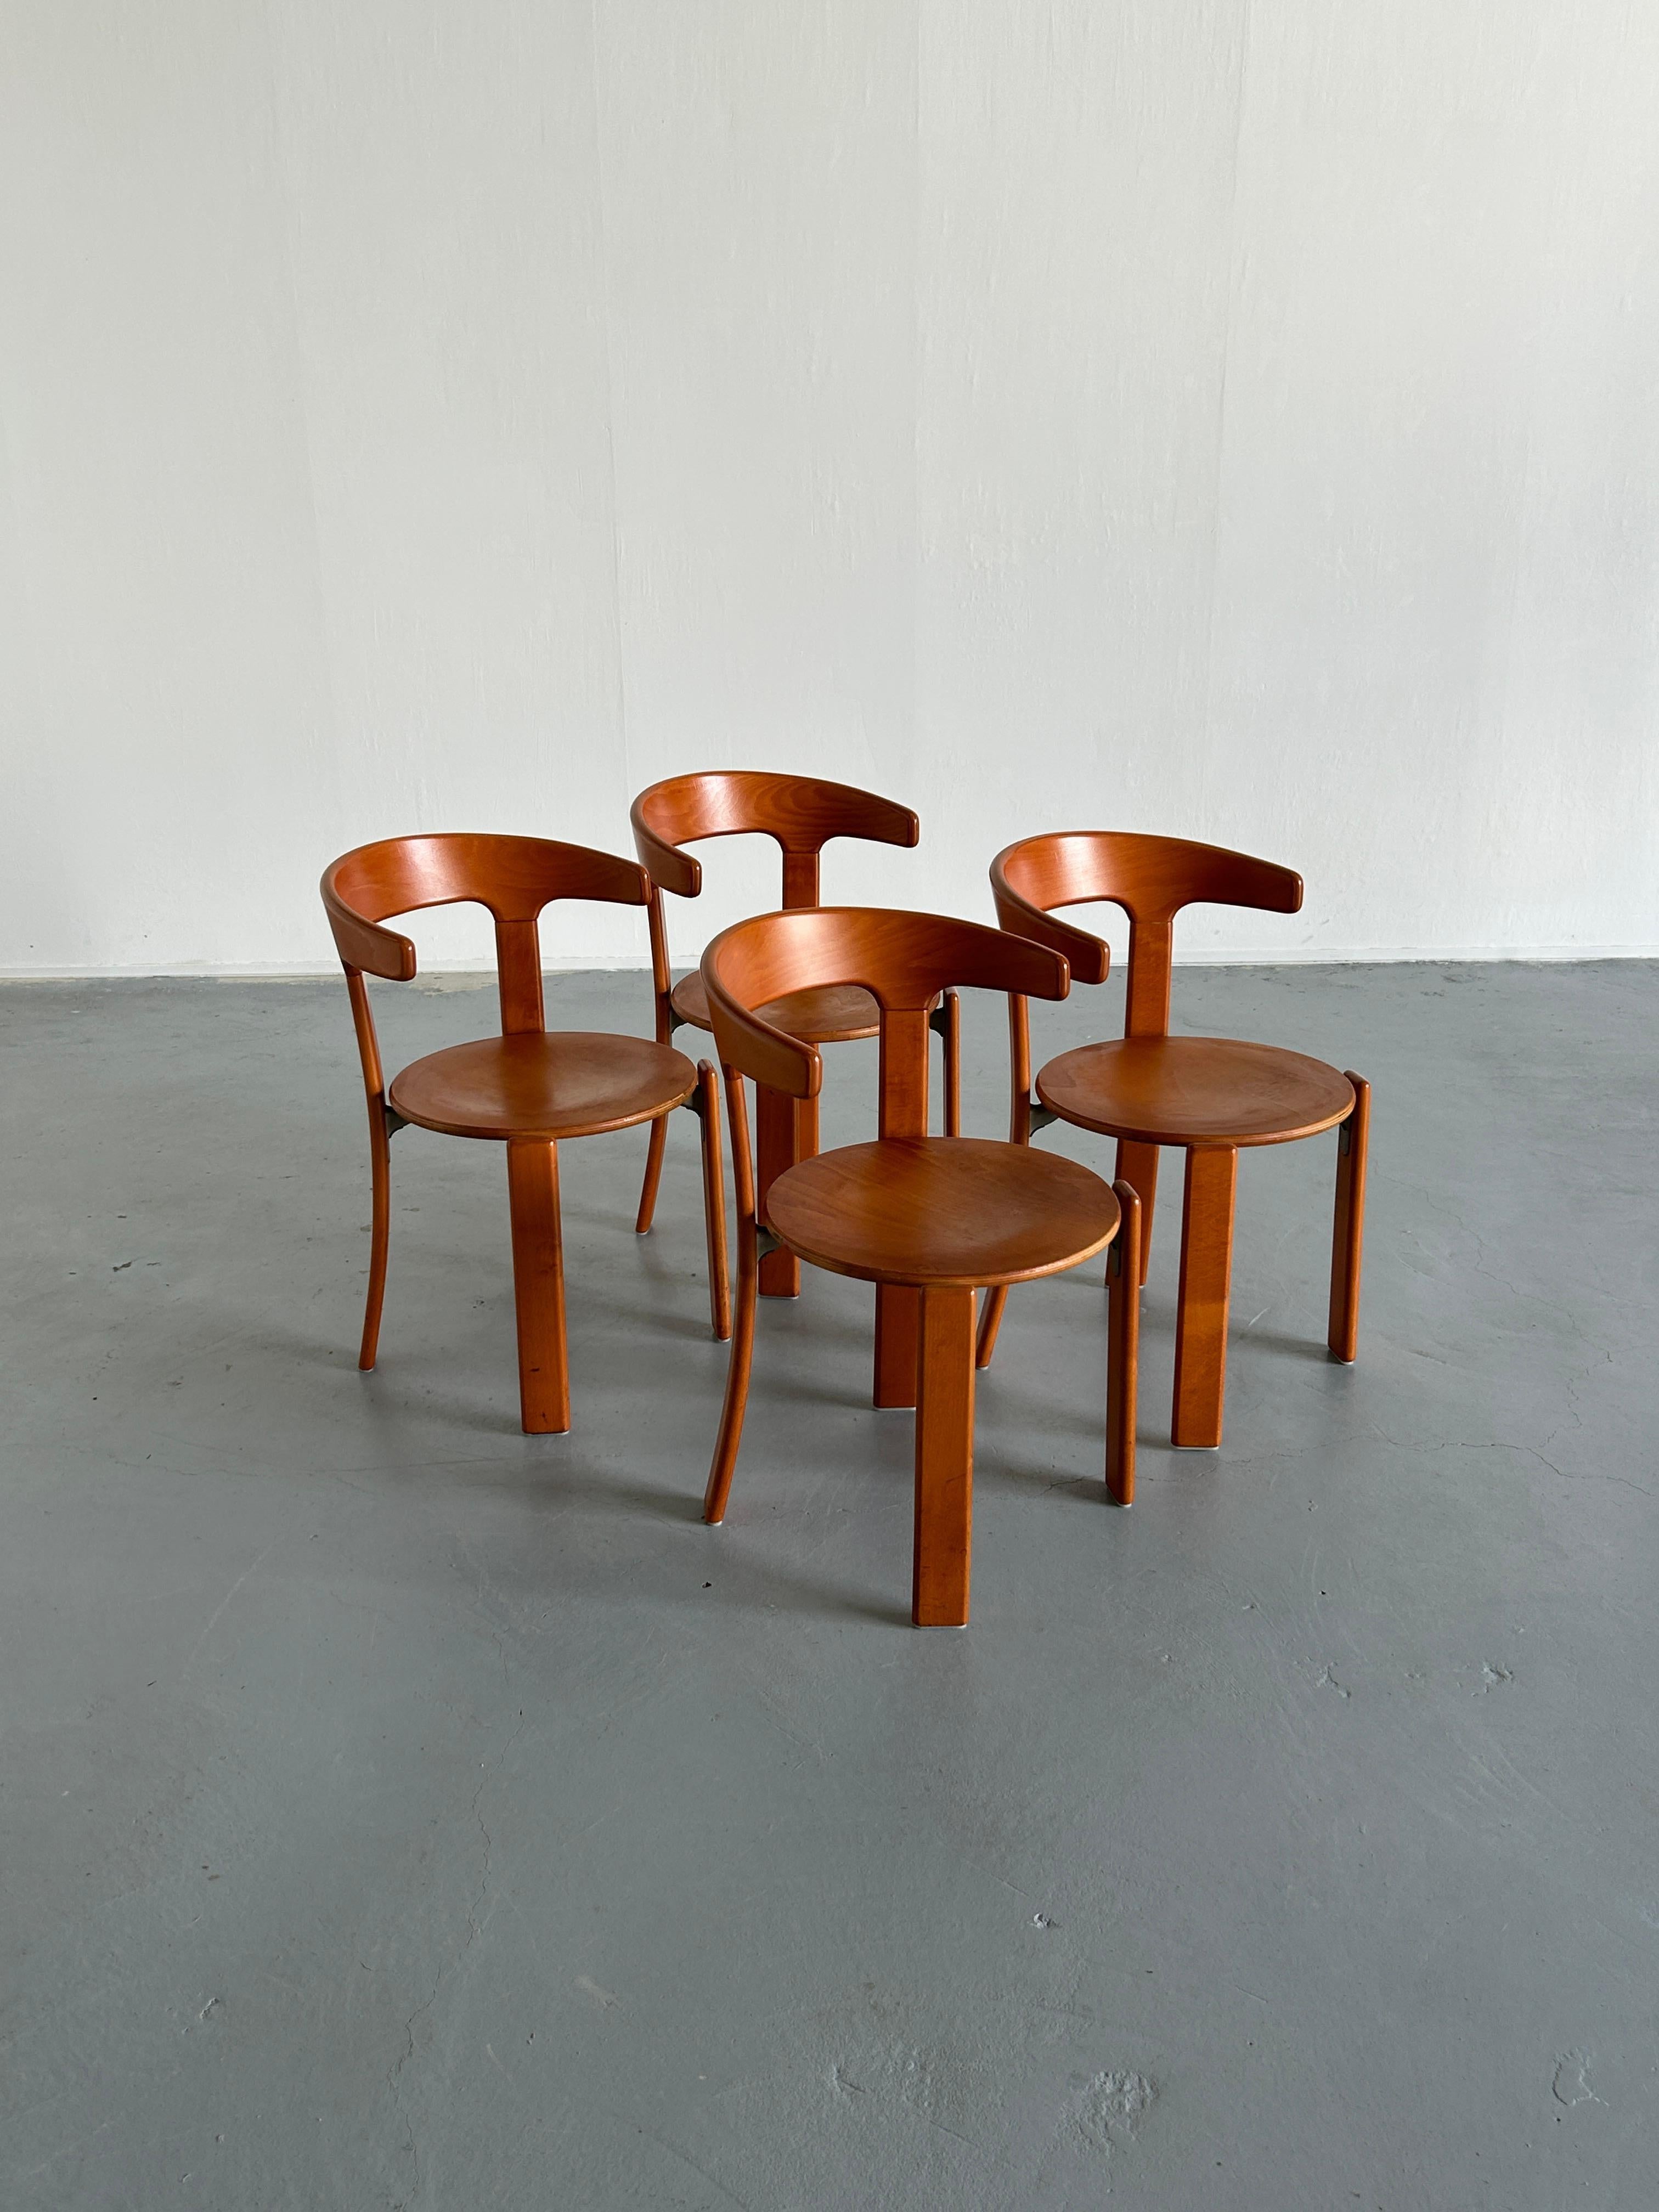 Set of four Mid-Century-Modern dining chairs designed by Bruno Rey, 1970s. Model with the armrests.

Produced by Kusch+Co, 1994.

The dining chairs were made of solid beech, laminated plywood beech and cast aluminum. Characteristic steel